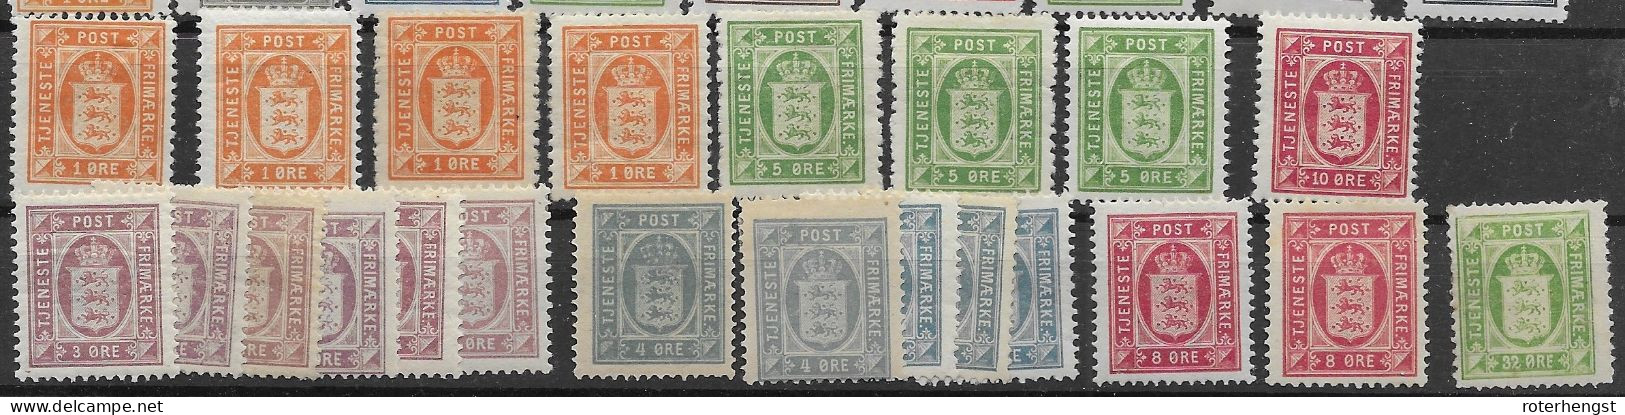 Denmark Officials Collection Mh* Some Are Mnh ** Different Perfs Wtm And Shades Over 200 Euros - Service